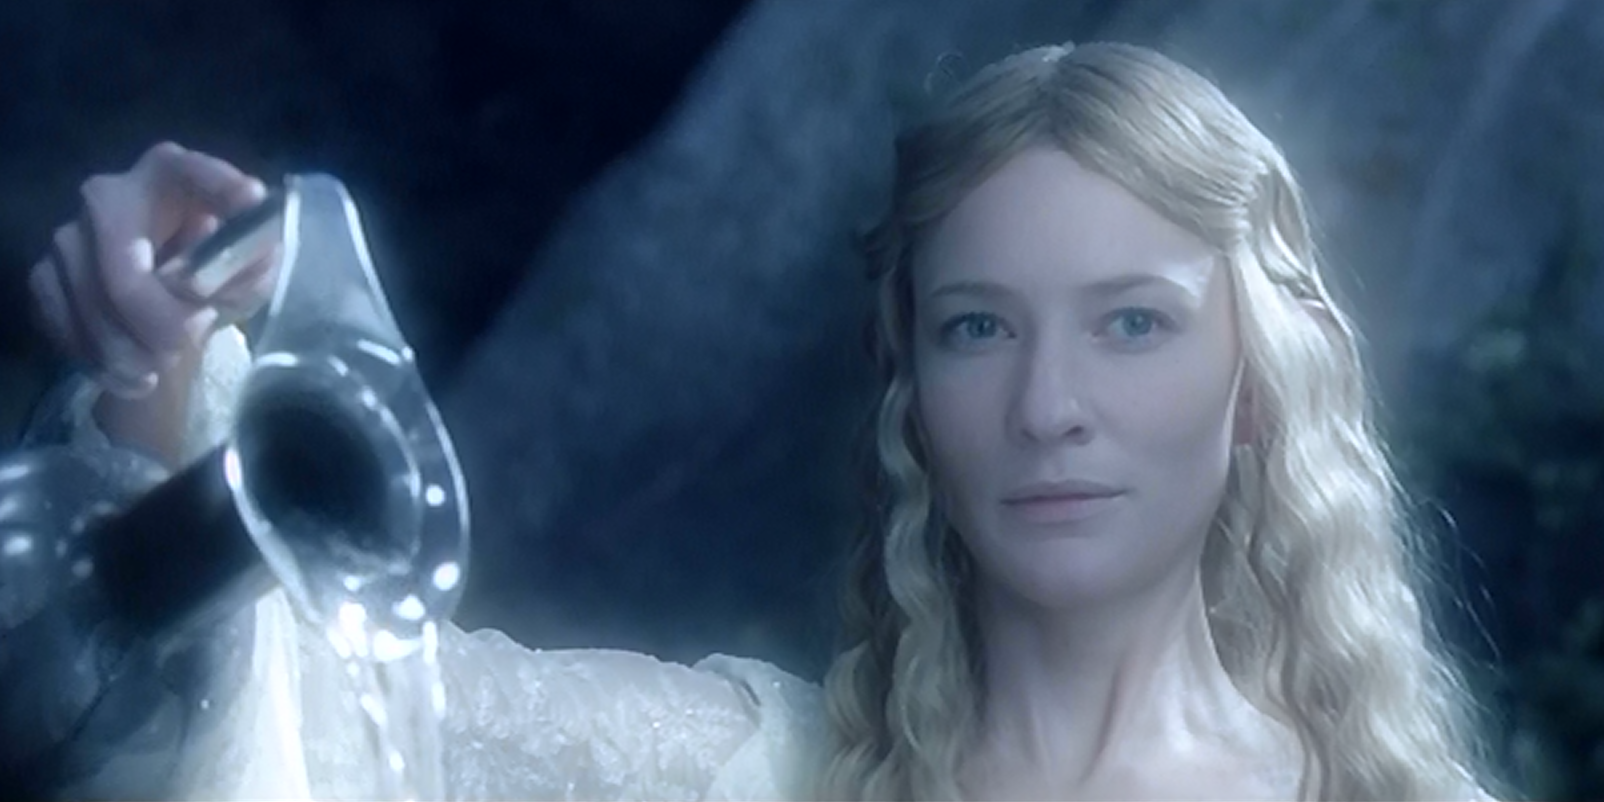 Galadriel pours water out in The Lord of the Rings